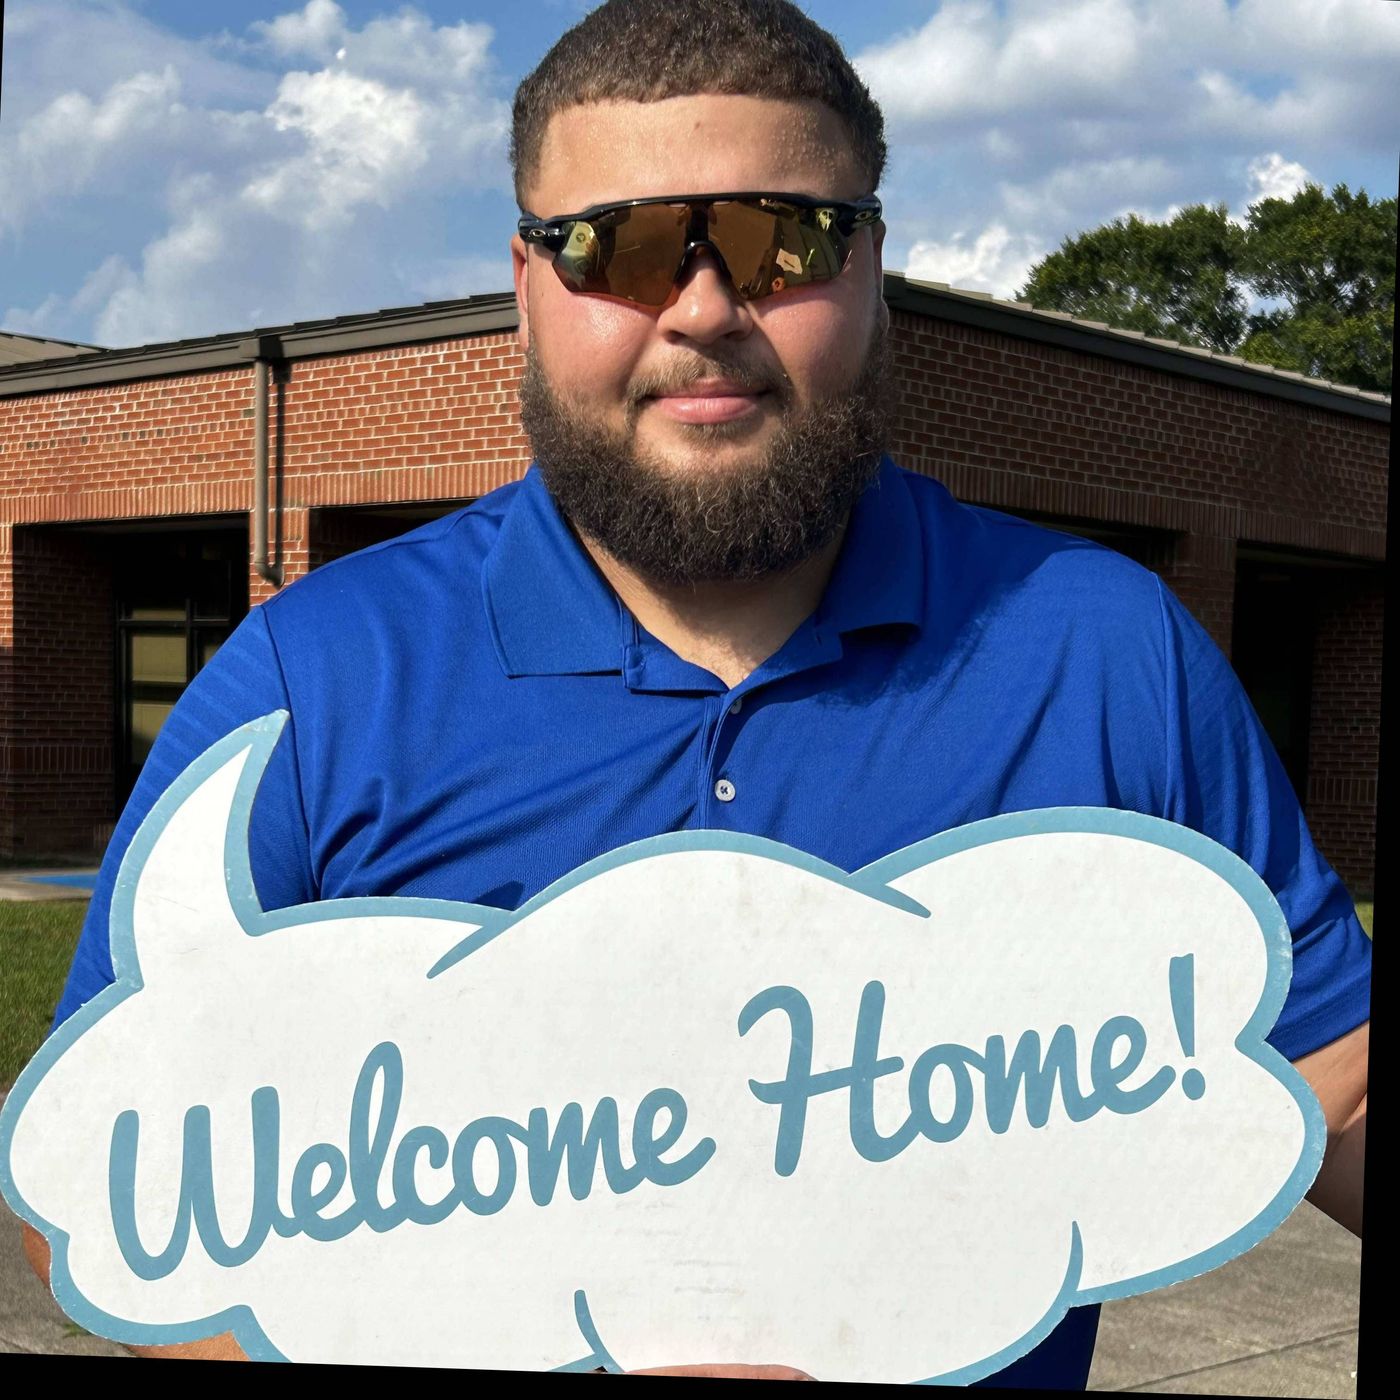 PHILLIP H. welcome home image